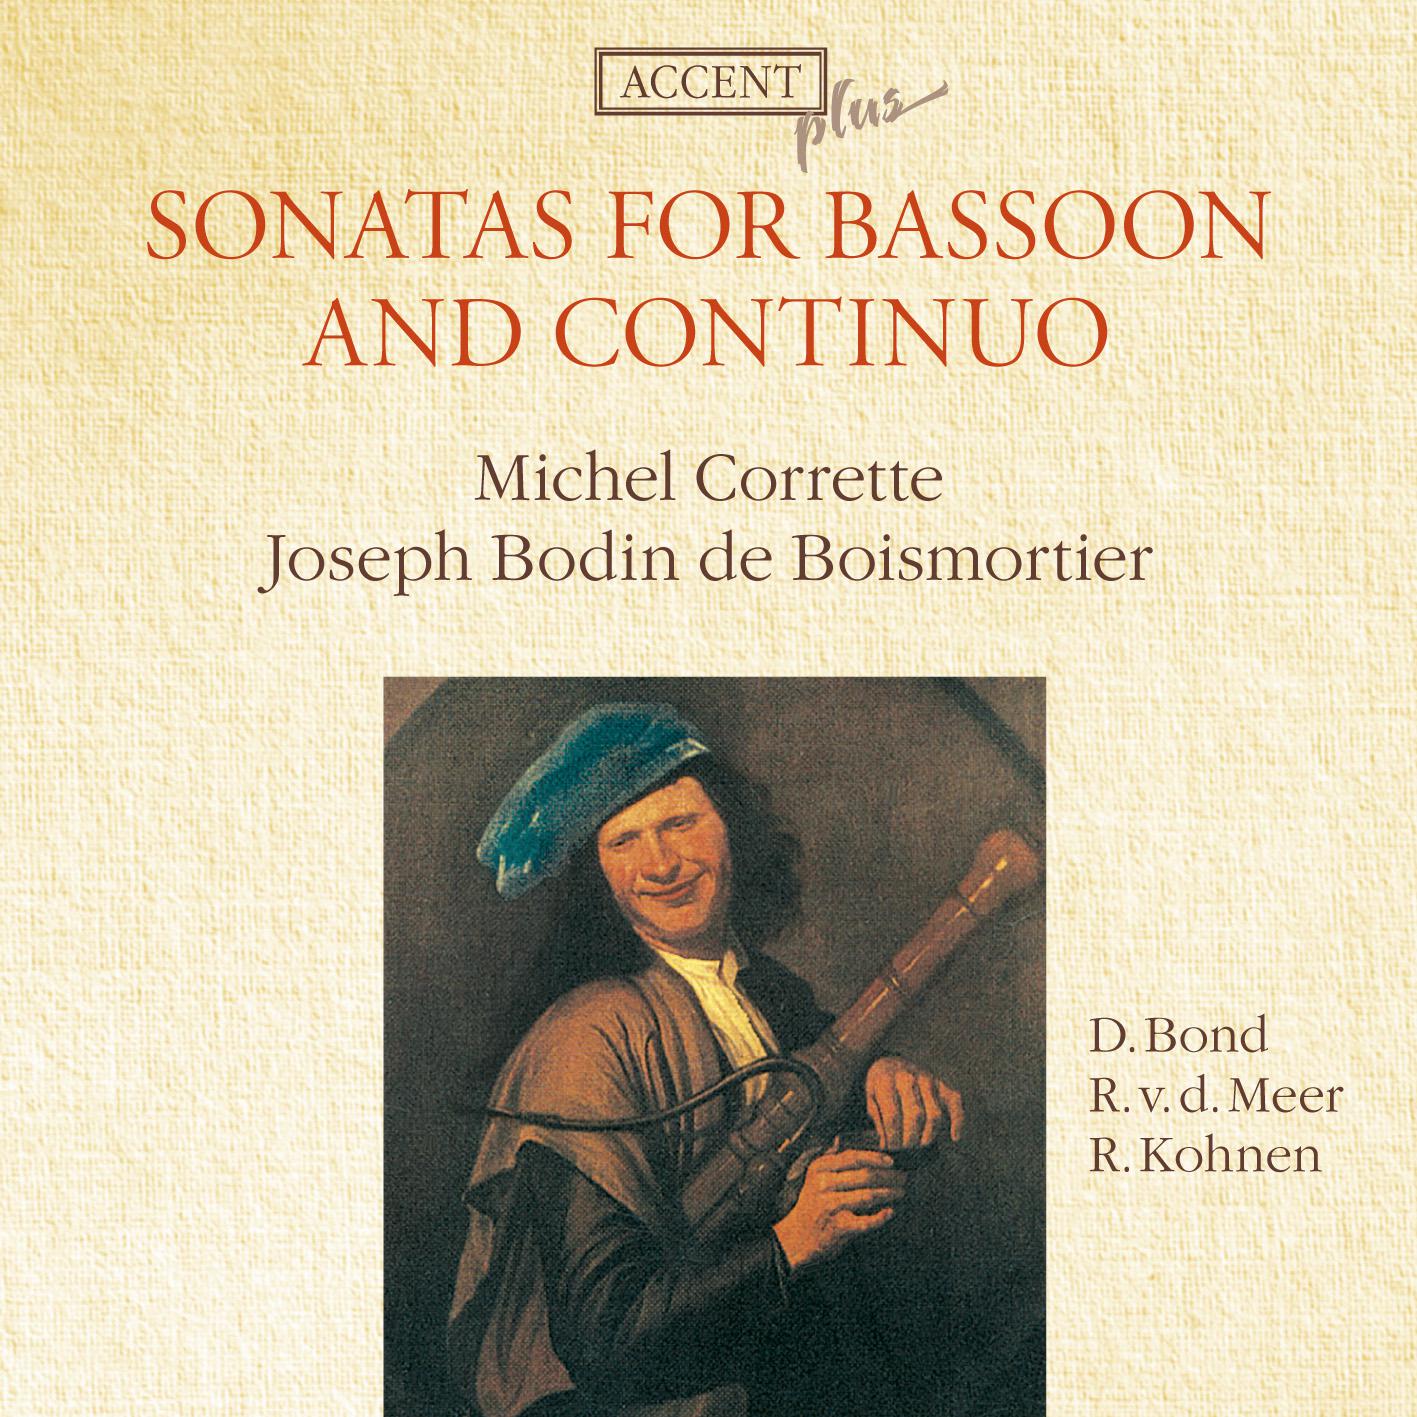 Sonatas for Bassoon and Continuo